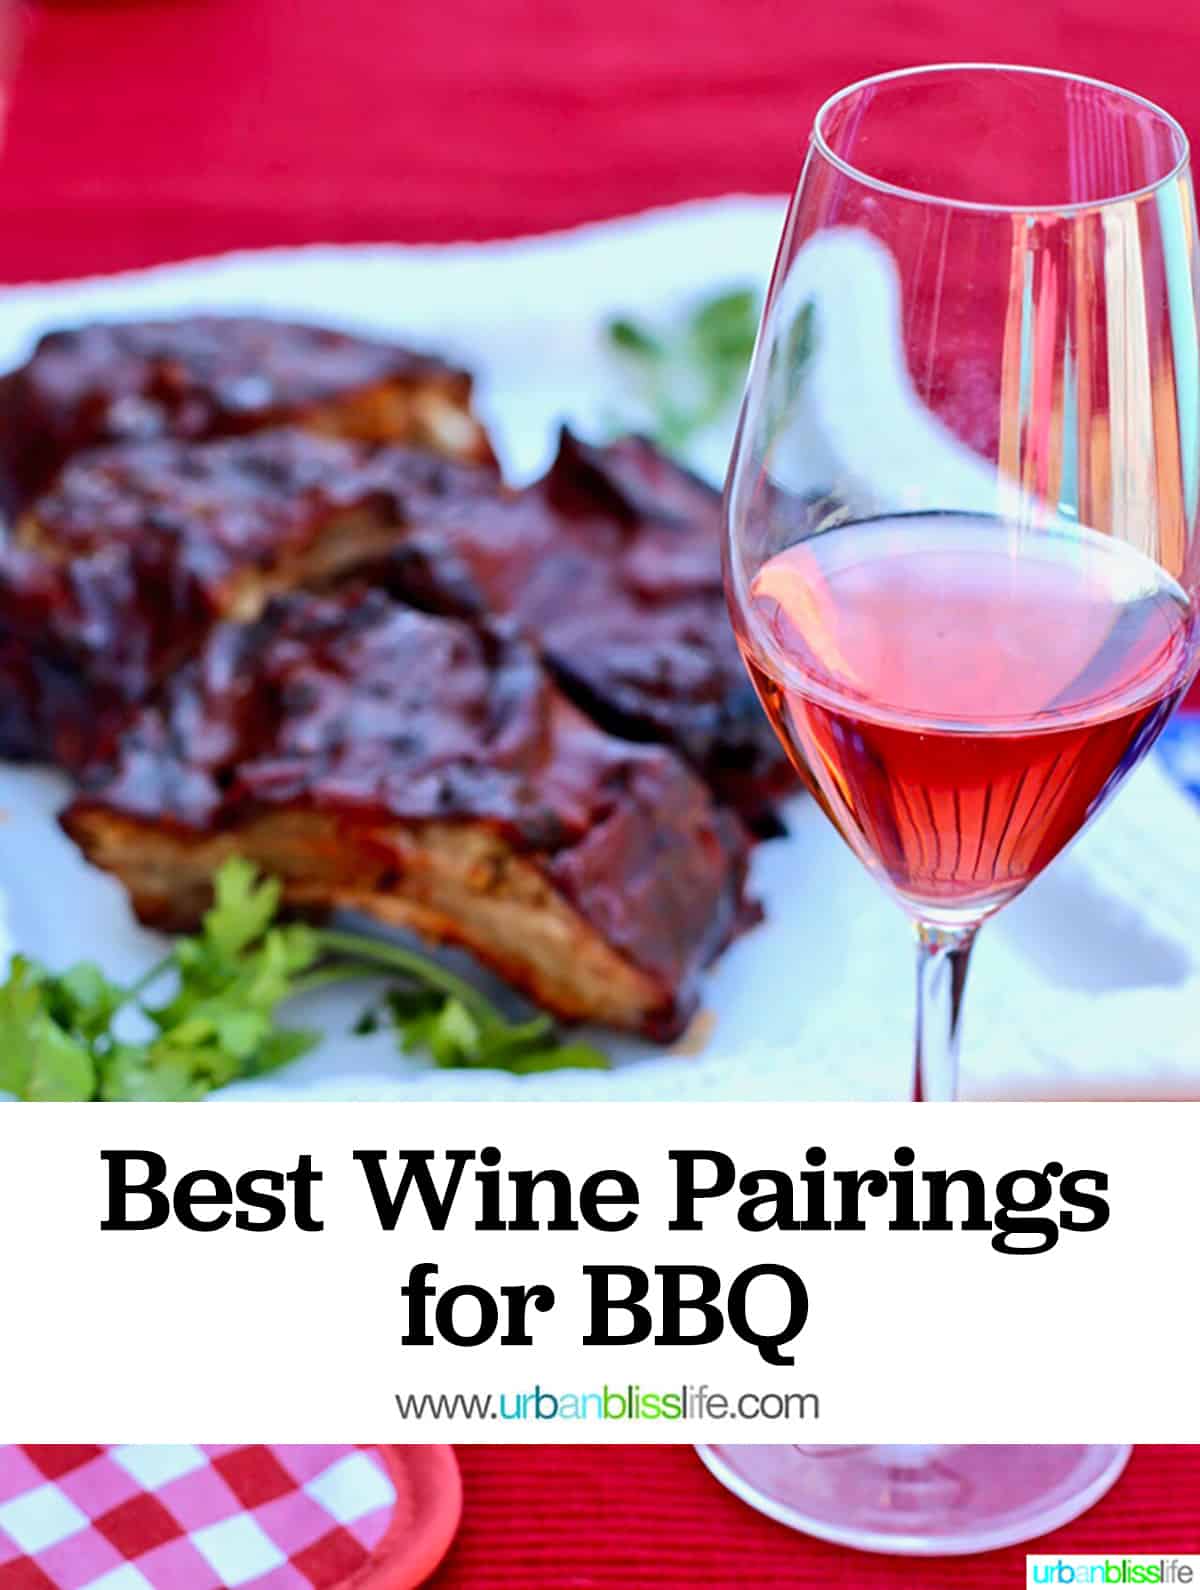 glass of wine next to plate of BBQ ribs with title text that reads "Best Wine Pairings for BBQ."